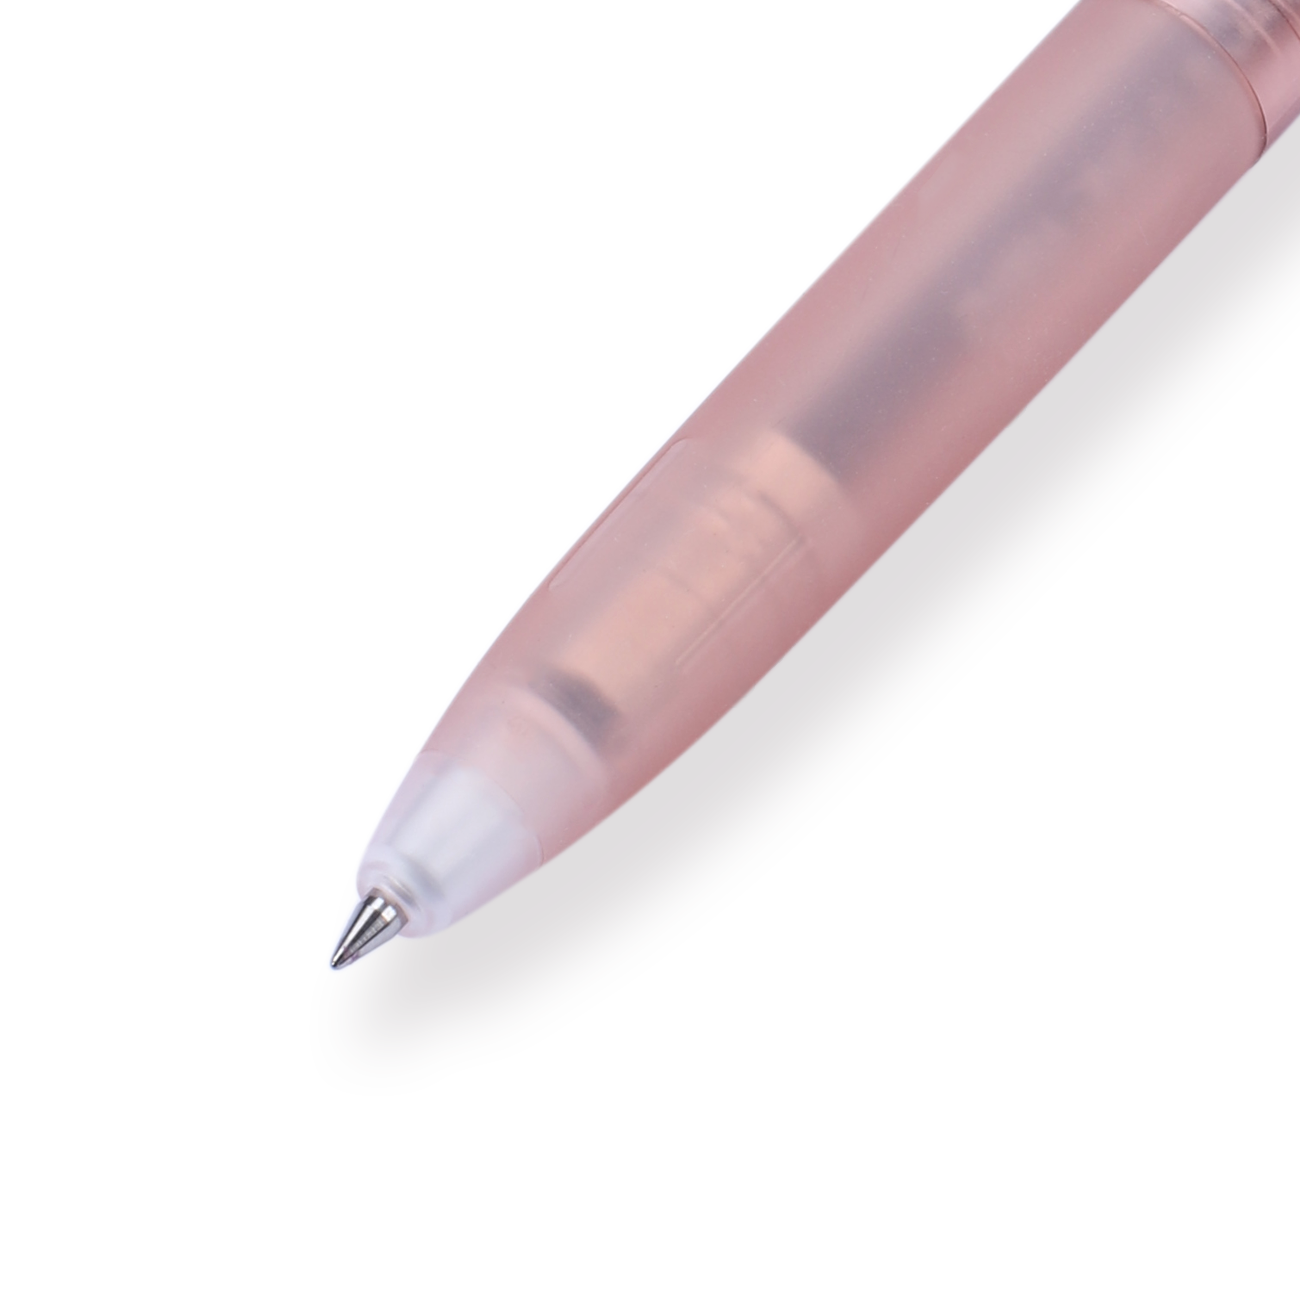 Zebra bLen Limited Edition Retractable Gel Pen - The Clear Nuance Color - Pink Brown - Stationery Pal